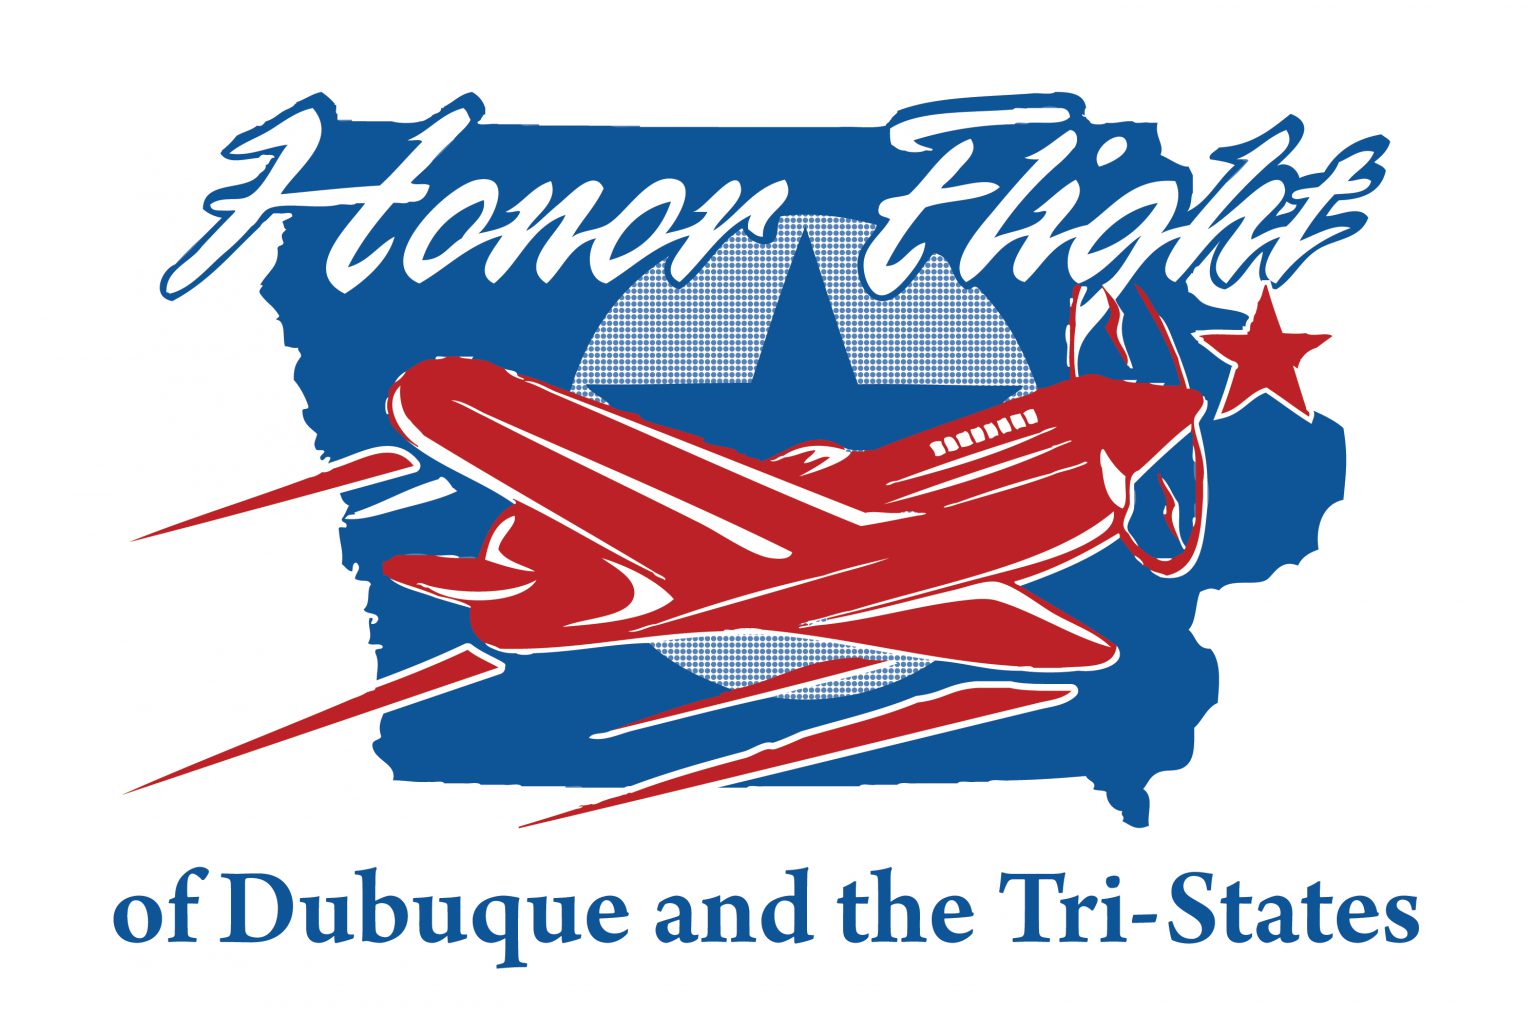 Veteran Application Honor Flight of Dubuque and the TriStates